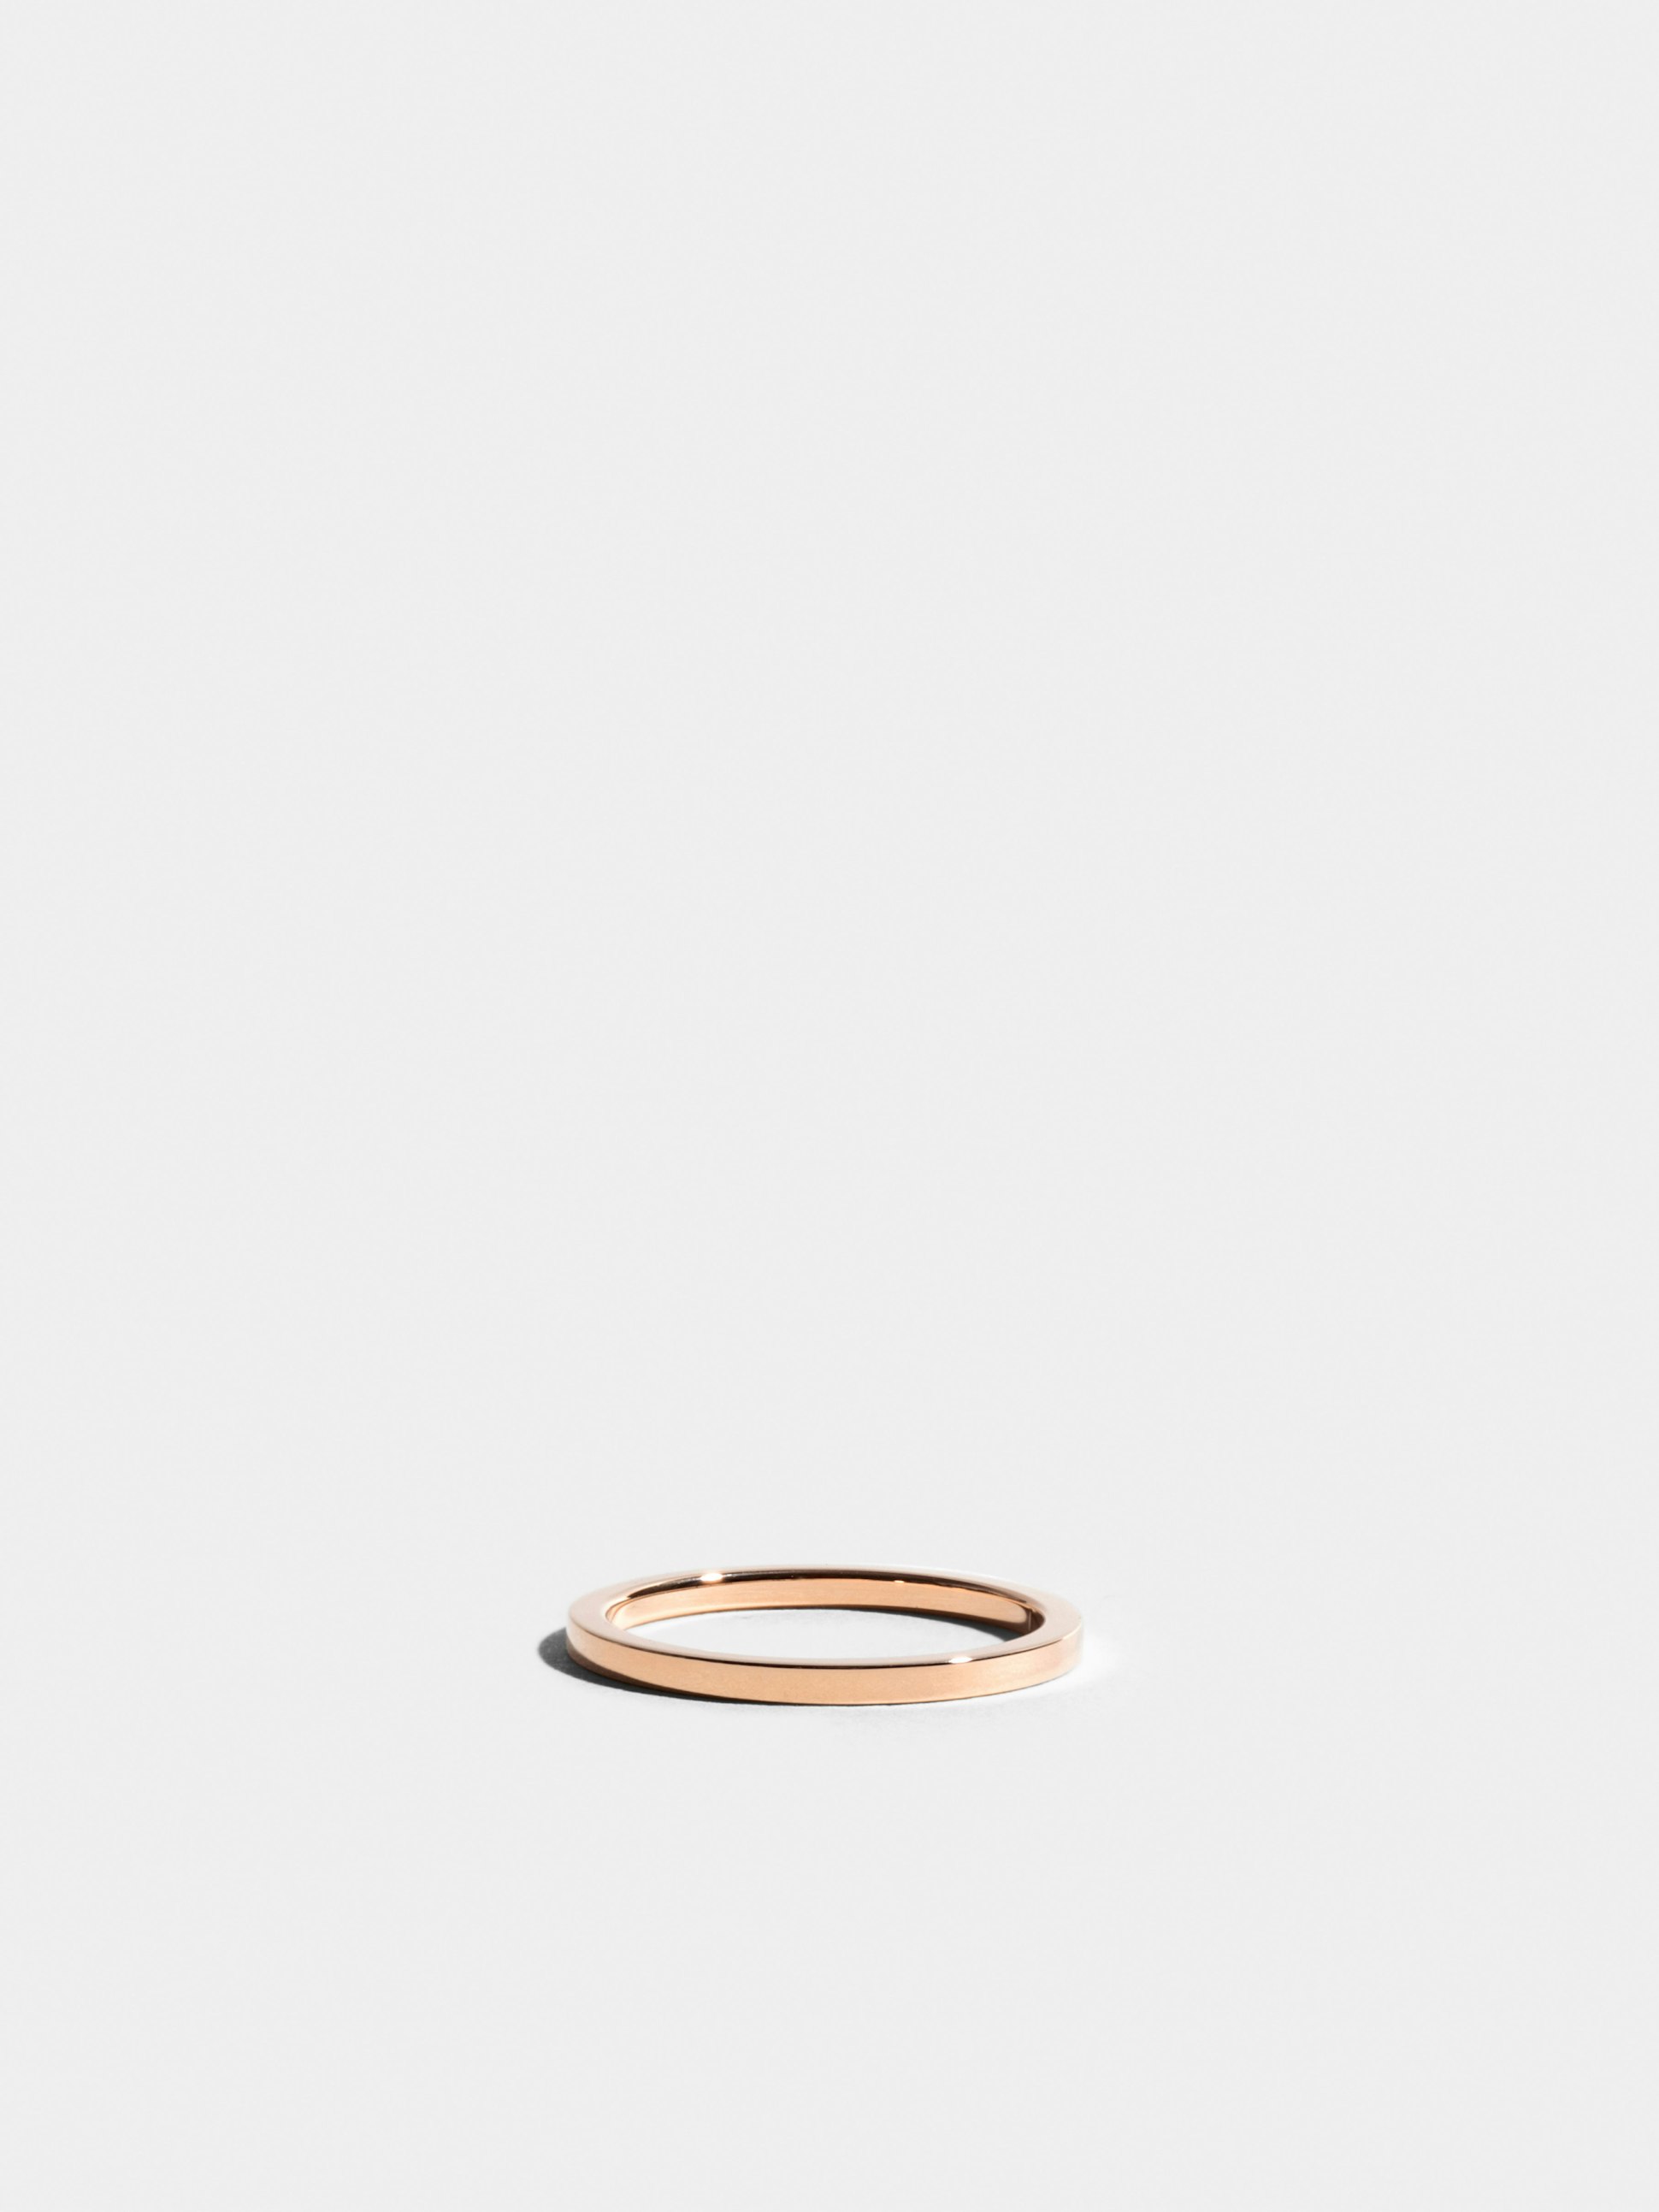 Anagramme flat ribbon ring in 18k Fairmined ethical rose gold